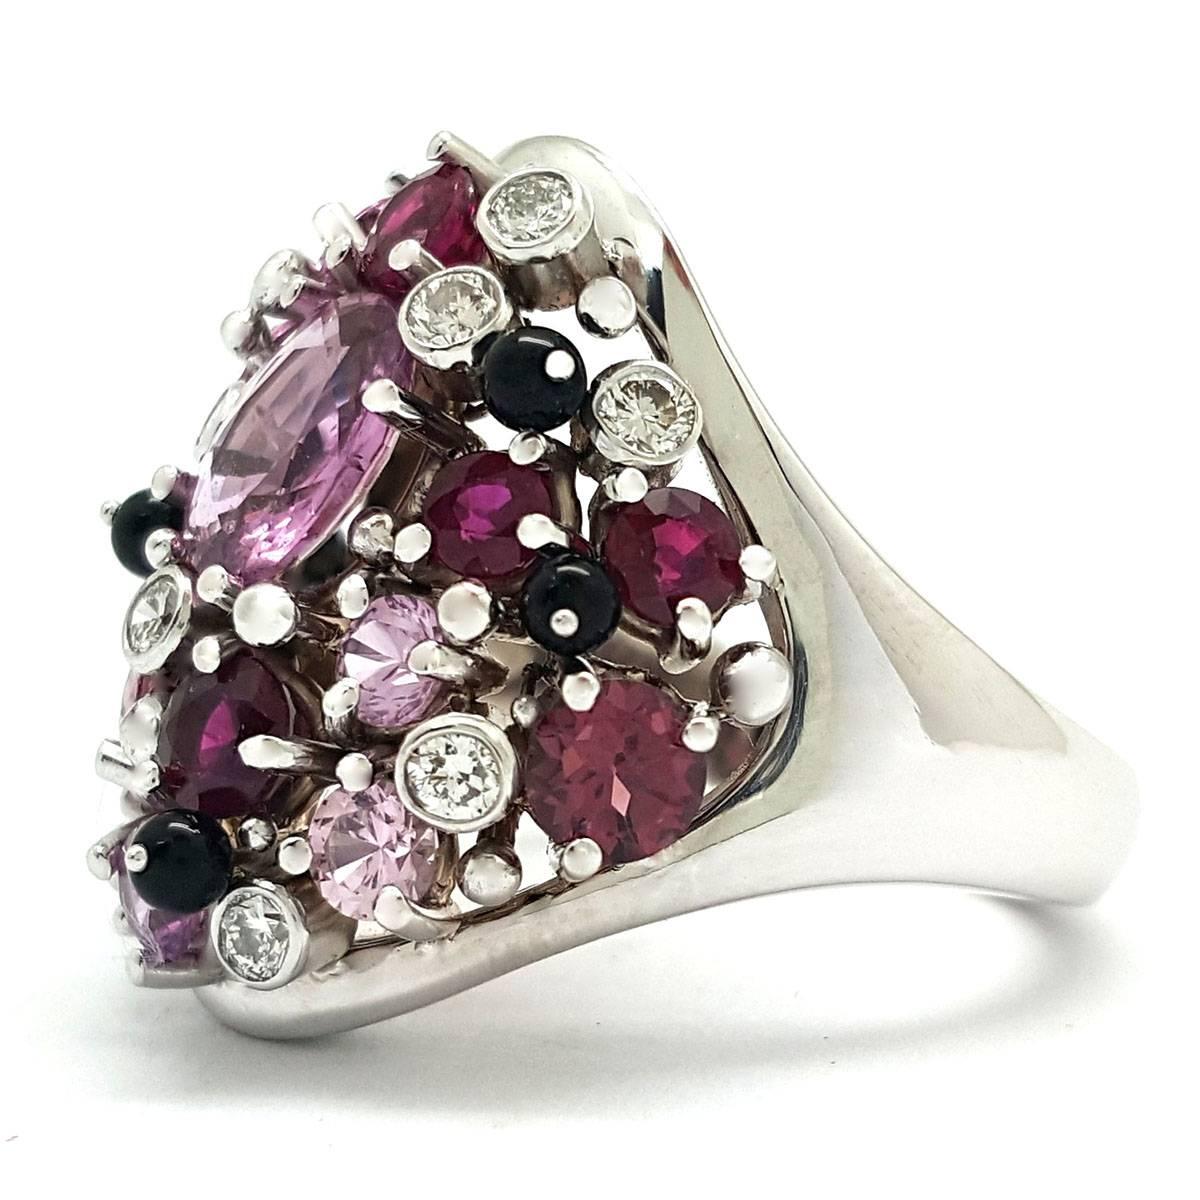 Modern Marvelous 14k White Gold, Pink Sapphire & Diamond Confetti Cocktail Ring For Sale